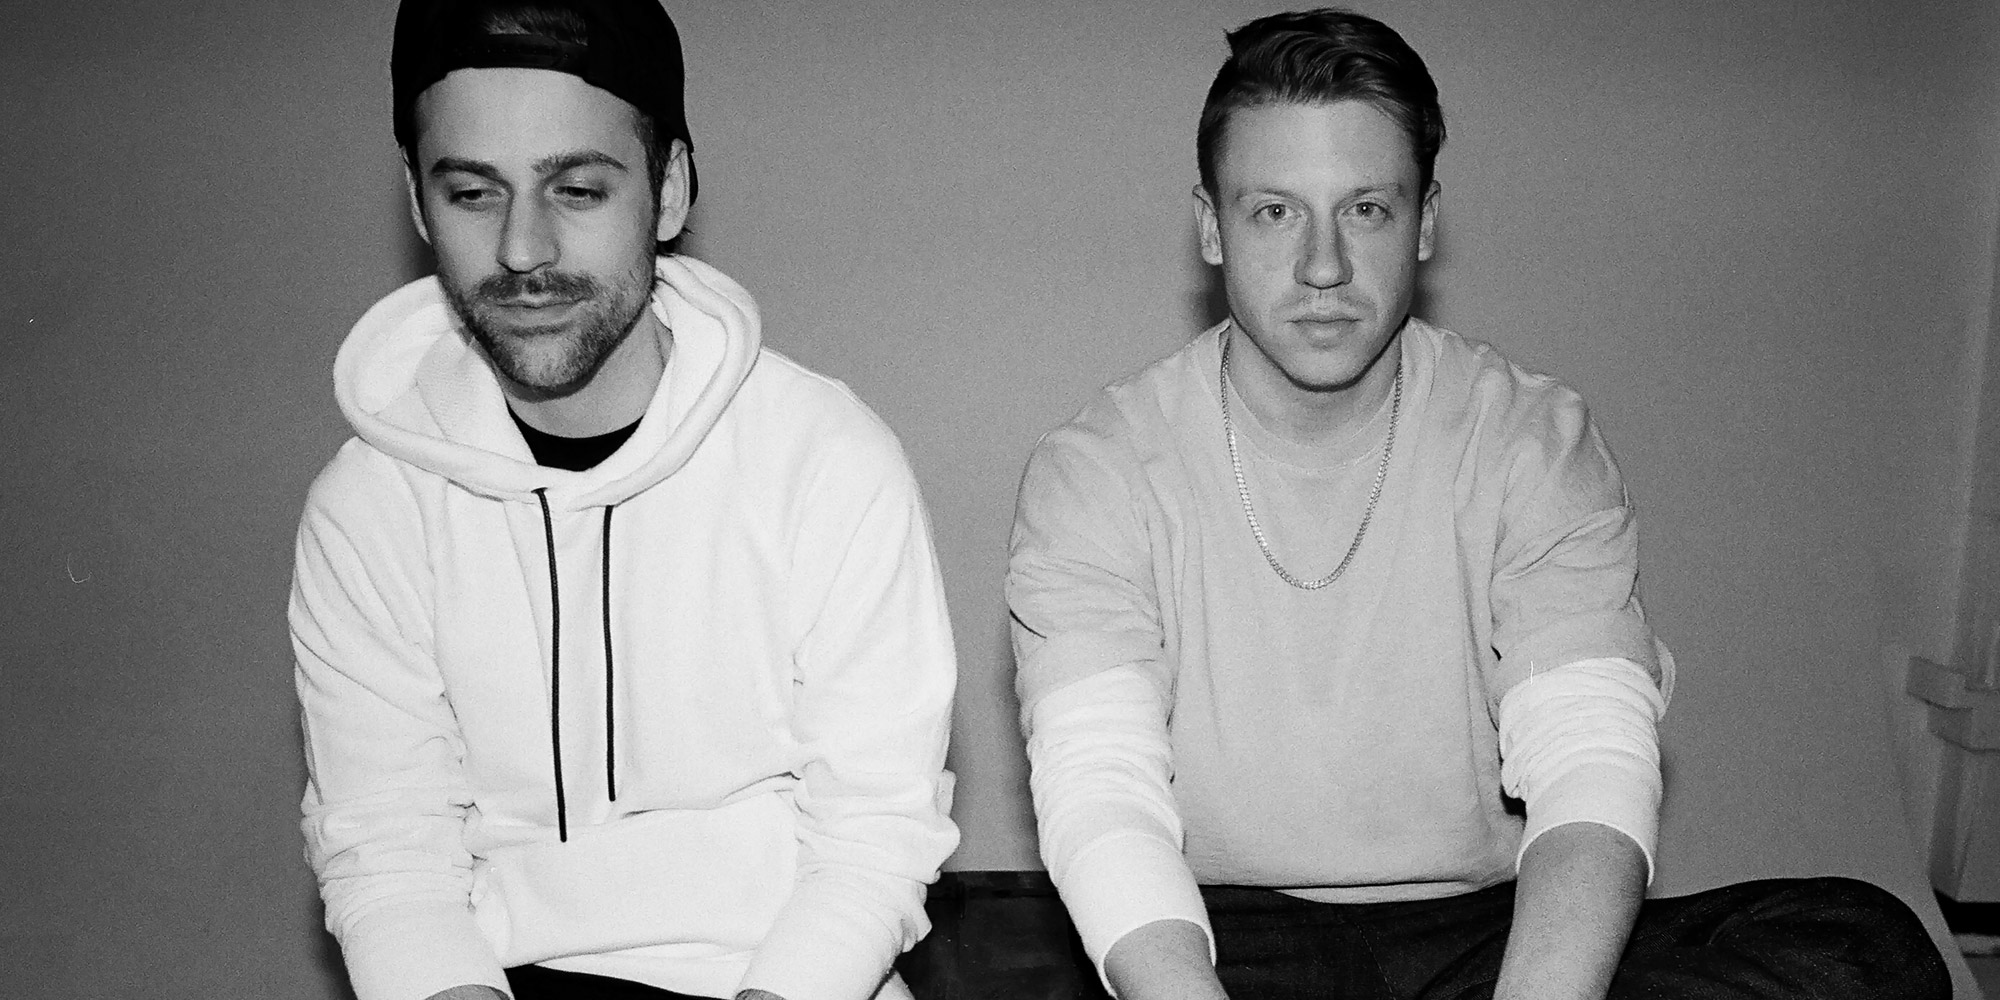 Macklemore’s wit and Ryan Lewis’s inventive production come together once again in their latest collaboration, This Unruly Mess I’ve Made